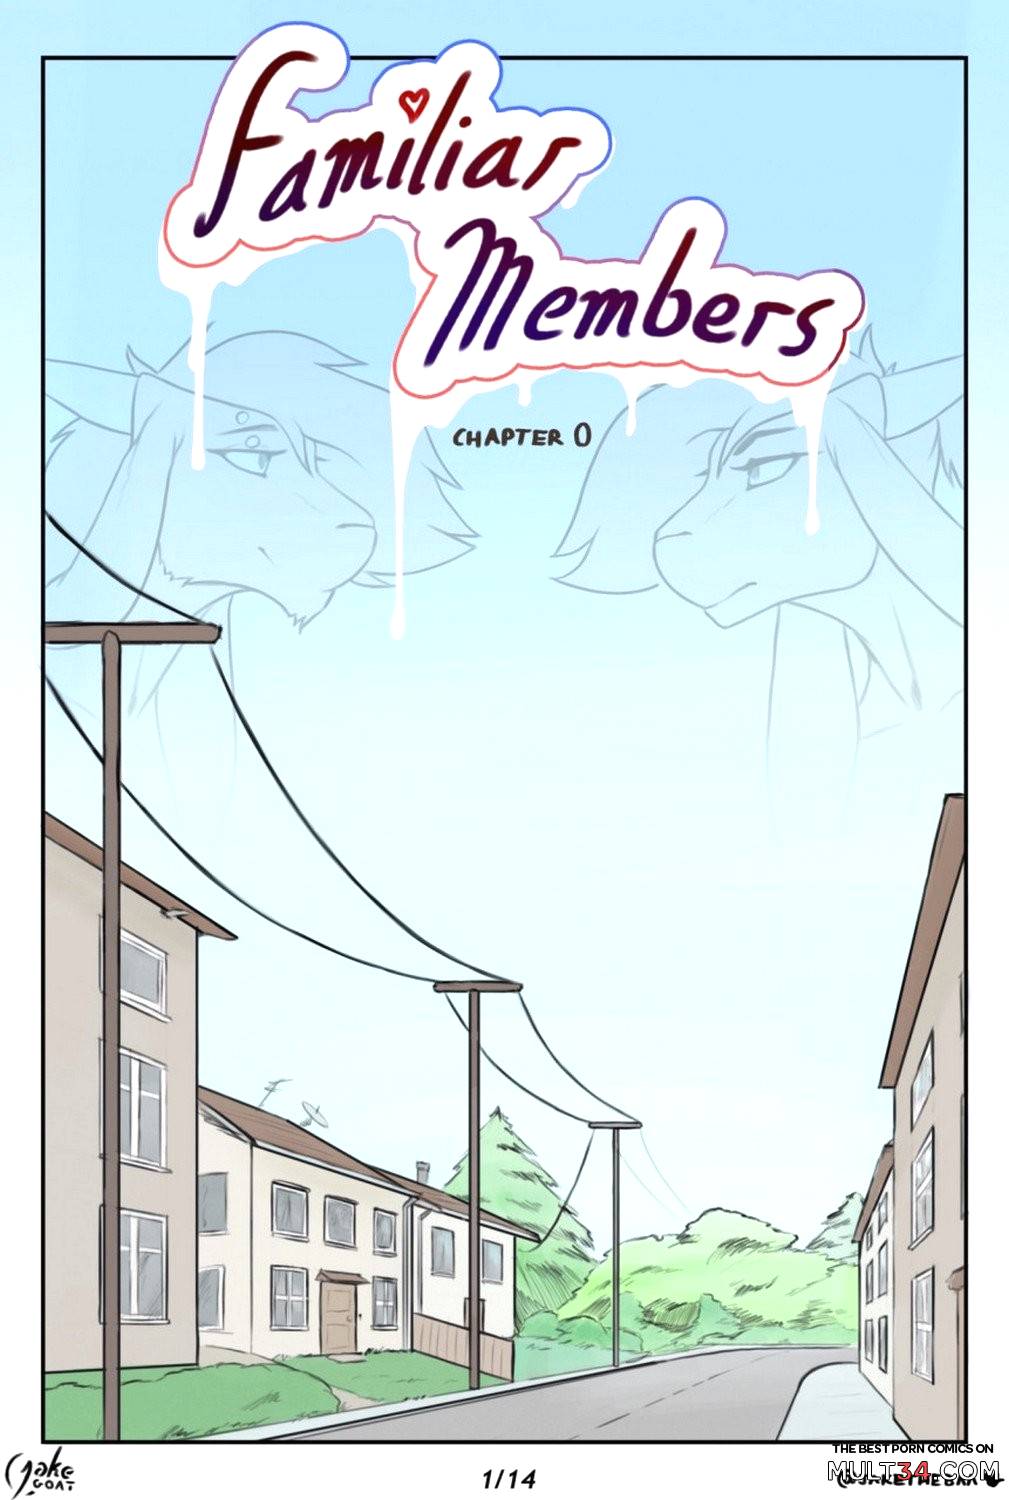 Familiar Members page 1